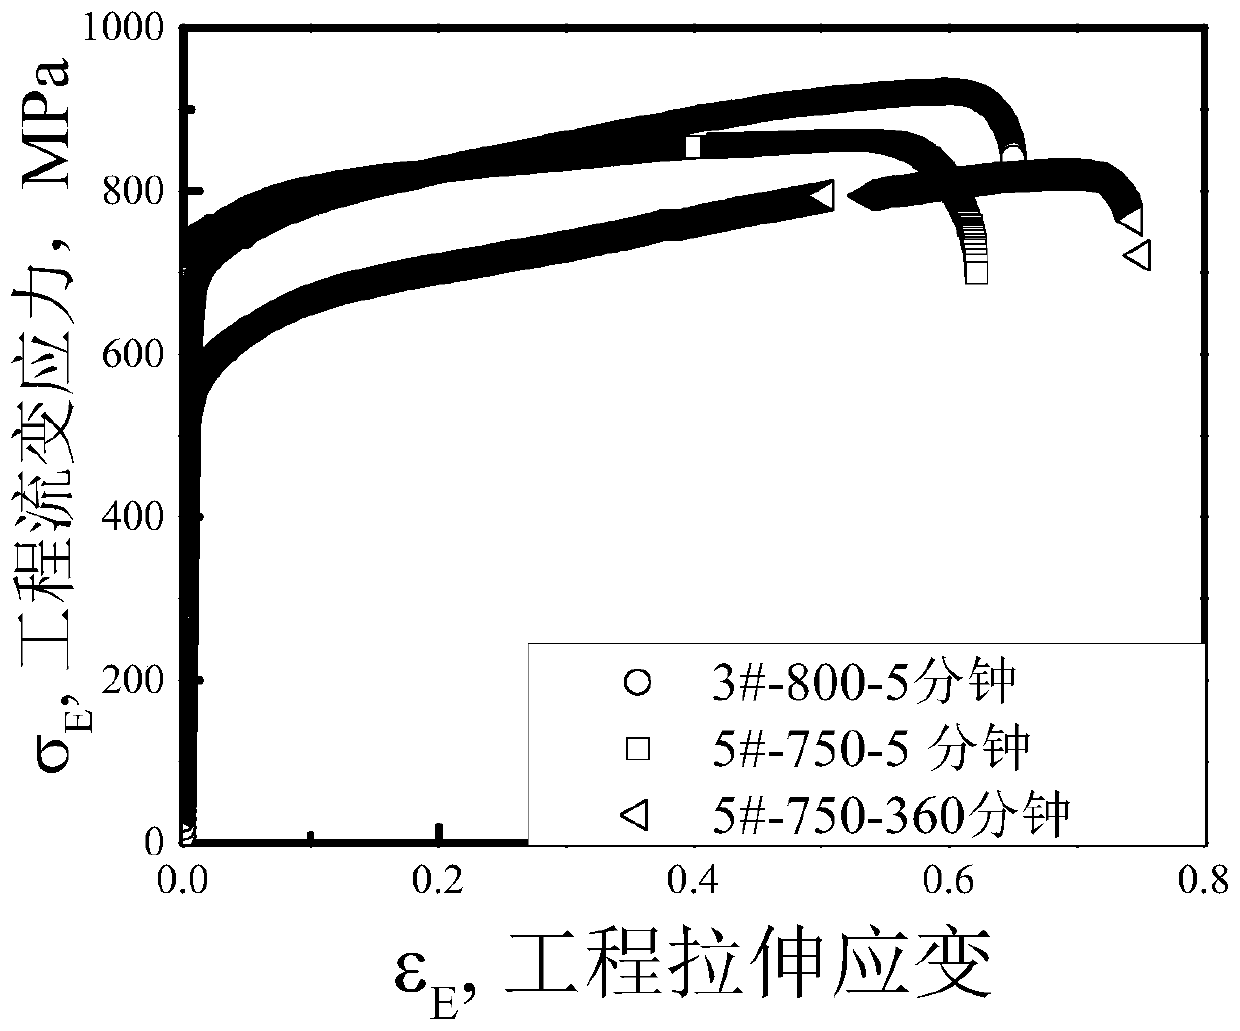 Automobile steel with high toughness and high product of strength and elongation and preparation method thereof